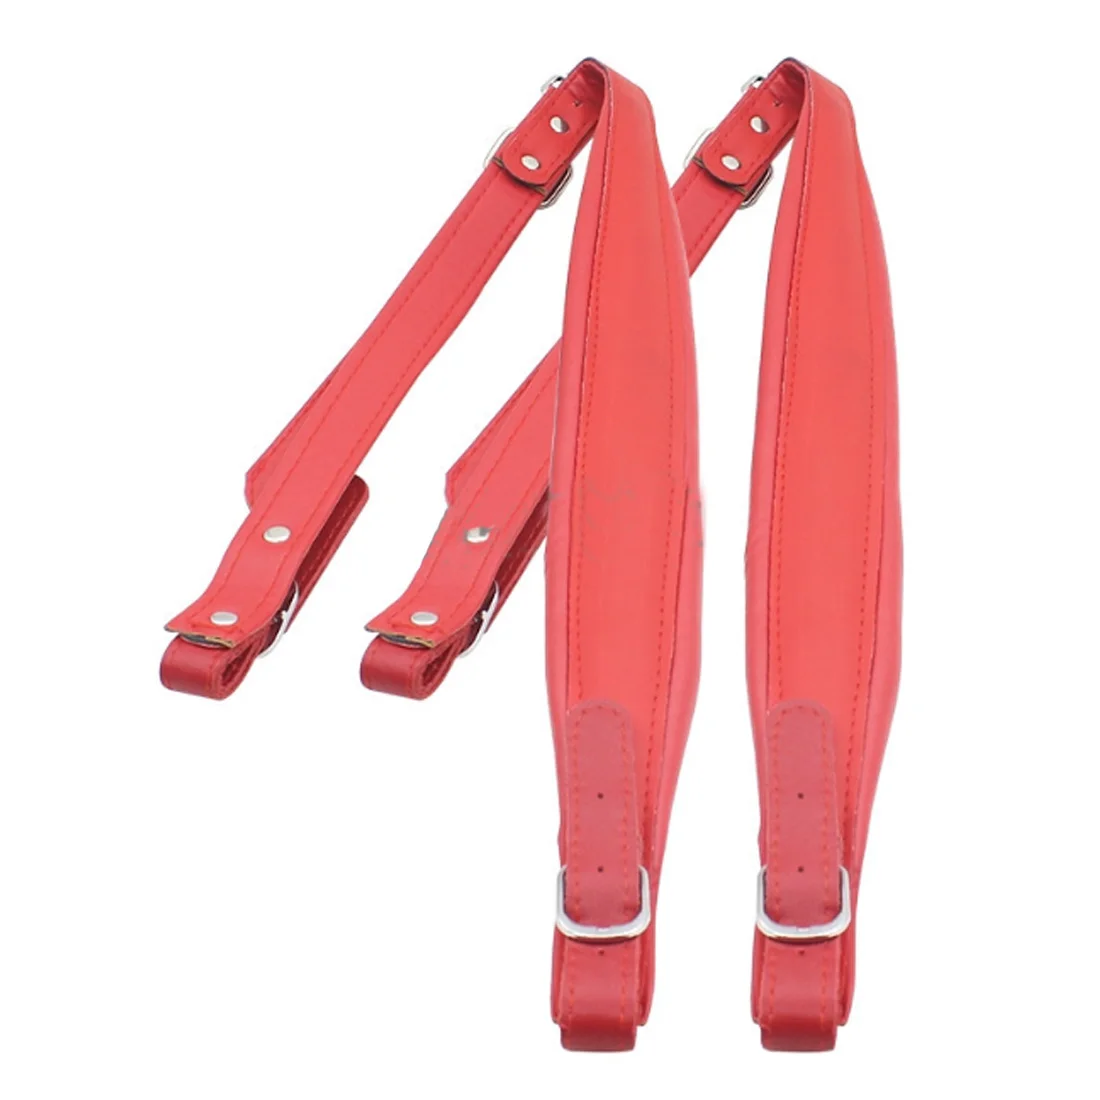 New Arrival Adjustable Accordion Straps PU Leather Shoulder Straps Harness For 16-120 Bass Comfortable Accordion Shoulder Straps